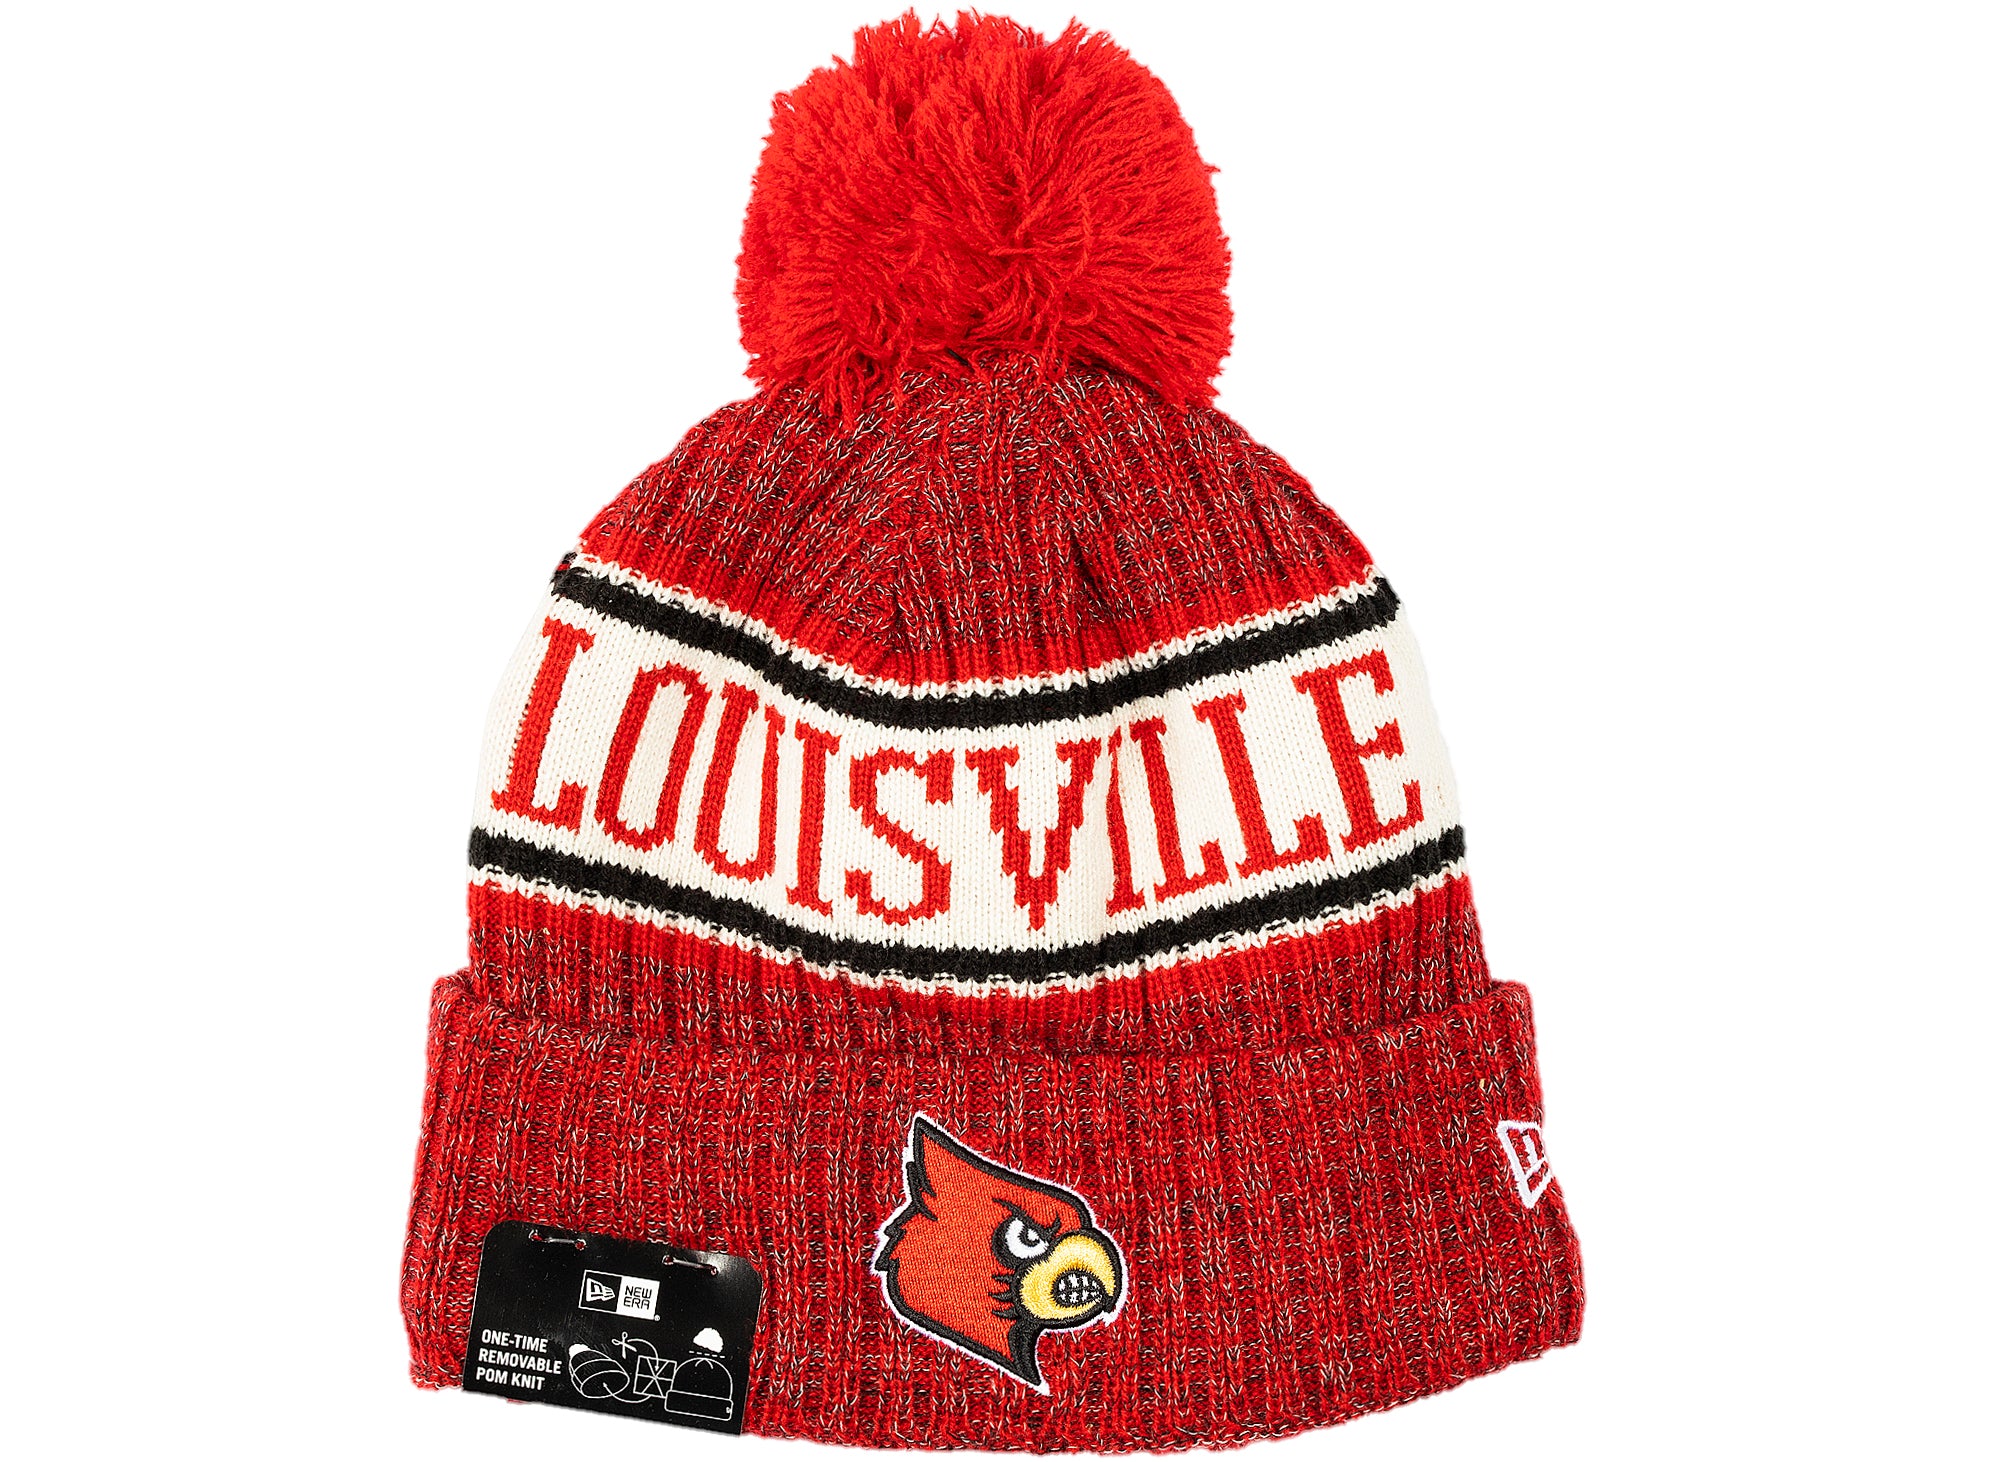 Top of the World KIDS / CHILD AGE 3-7 Louisville Cardinals Knit BEANIE Hat